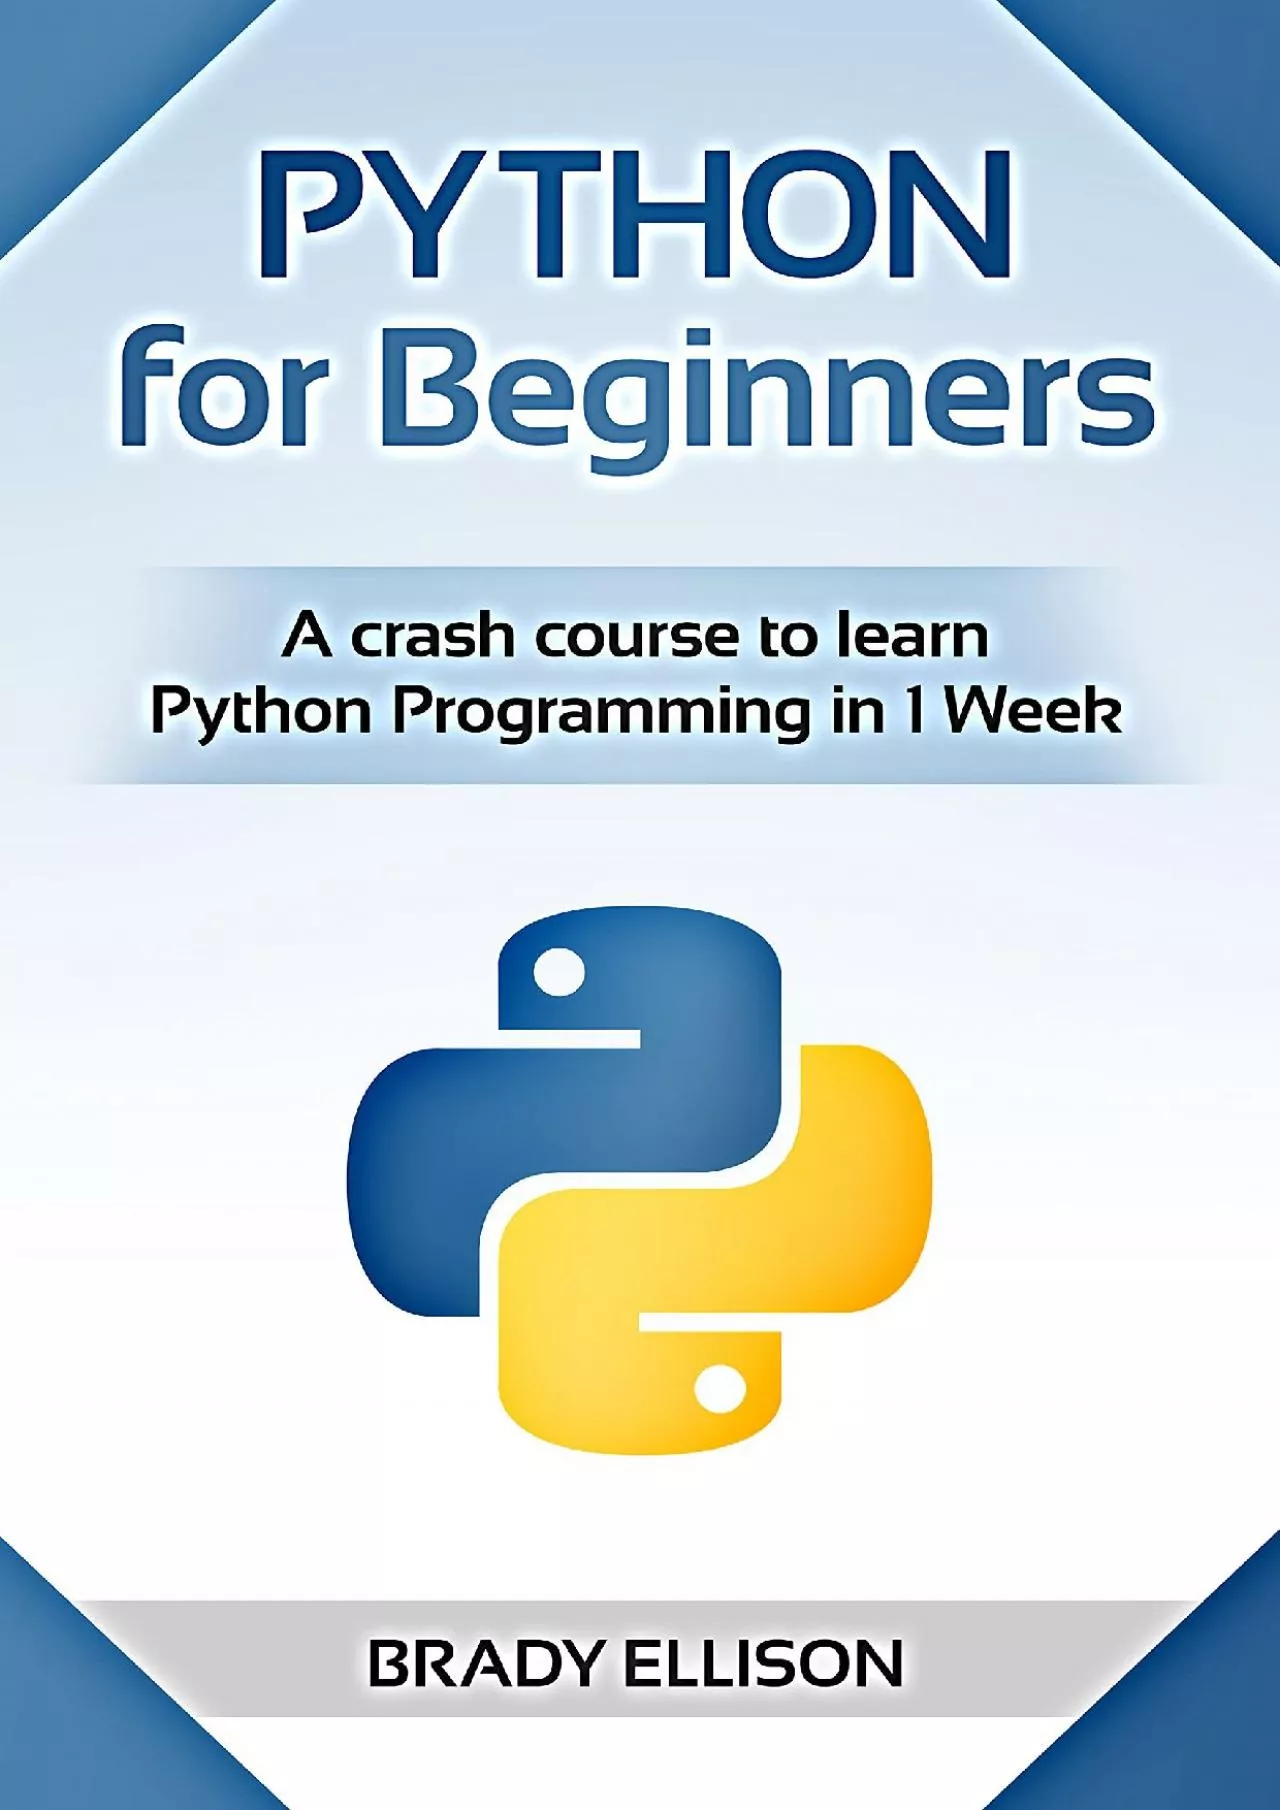 [FREE]-Python for Beginners A crash course to learn Python Programming in 1 Week (Programming